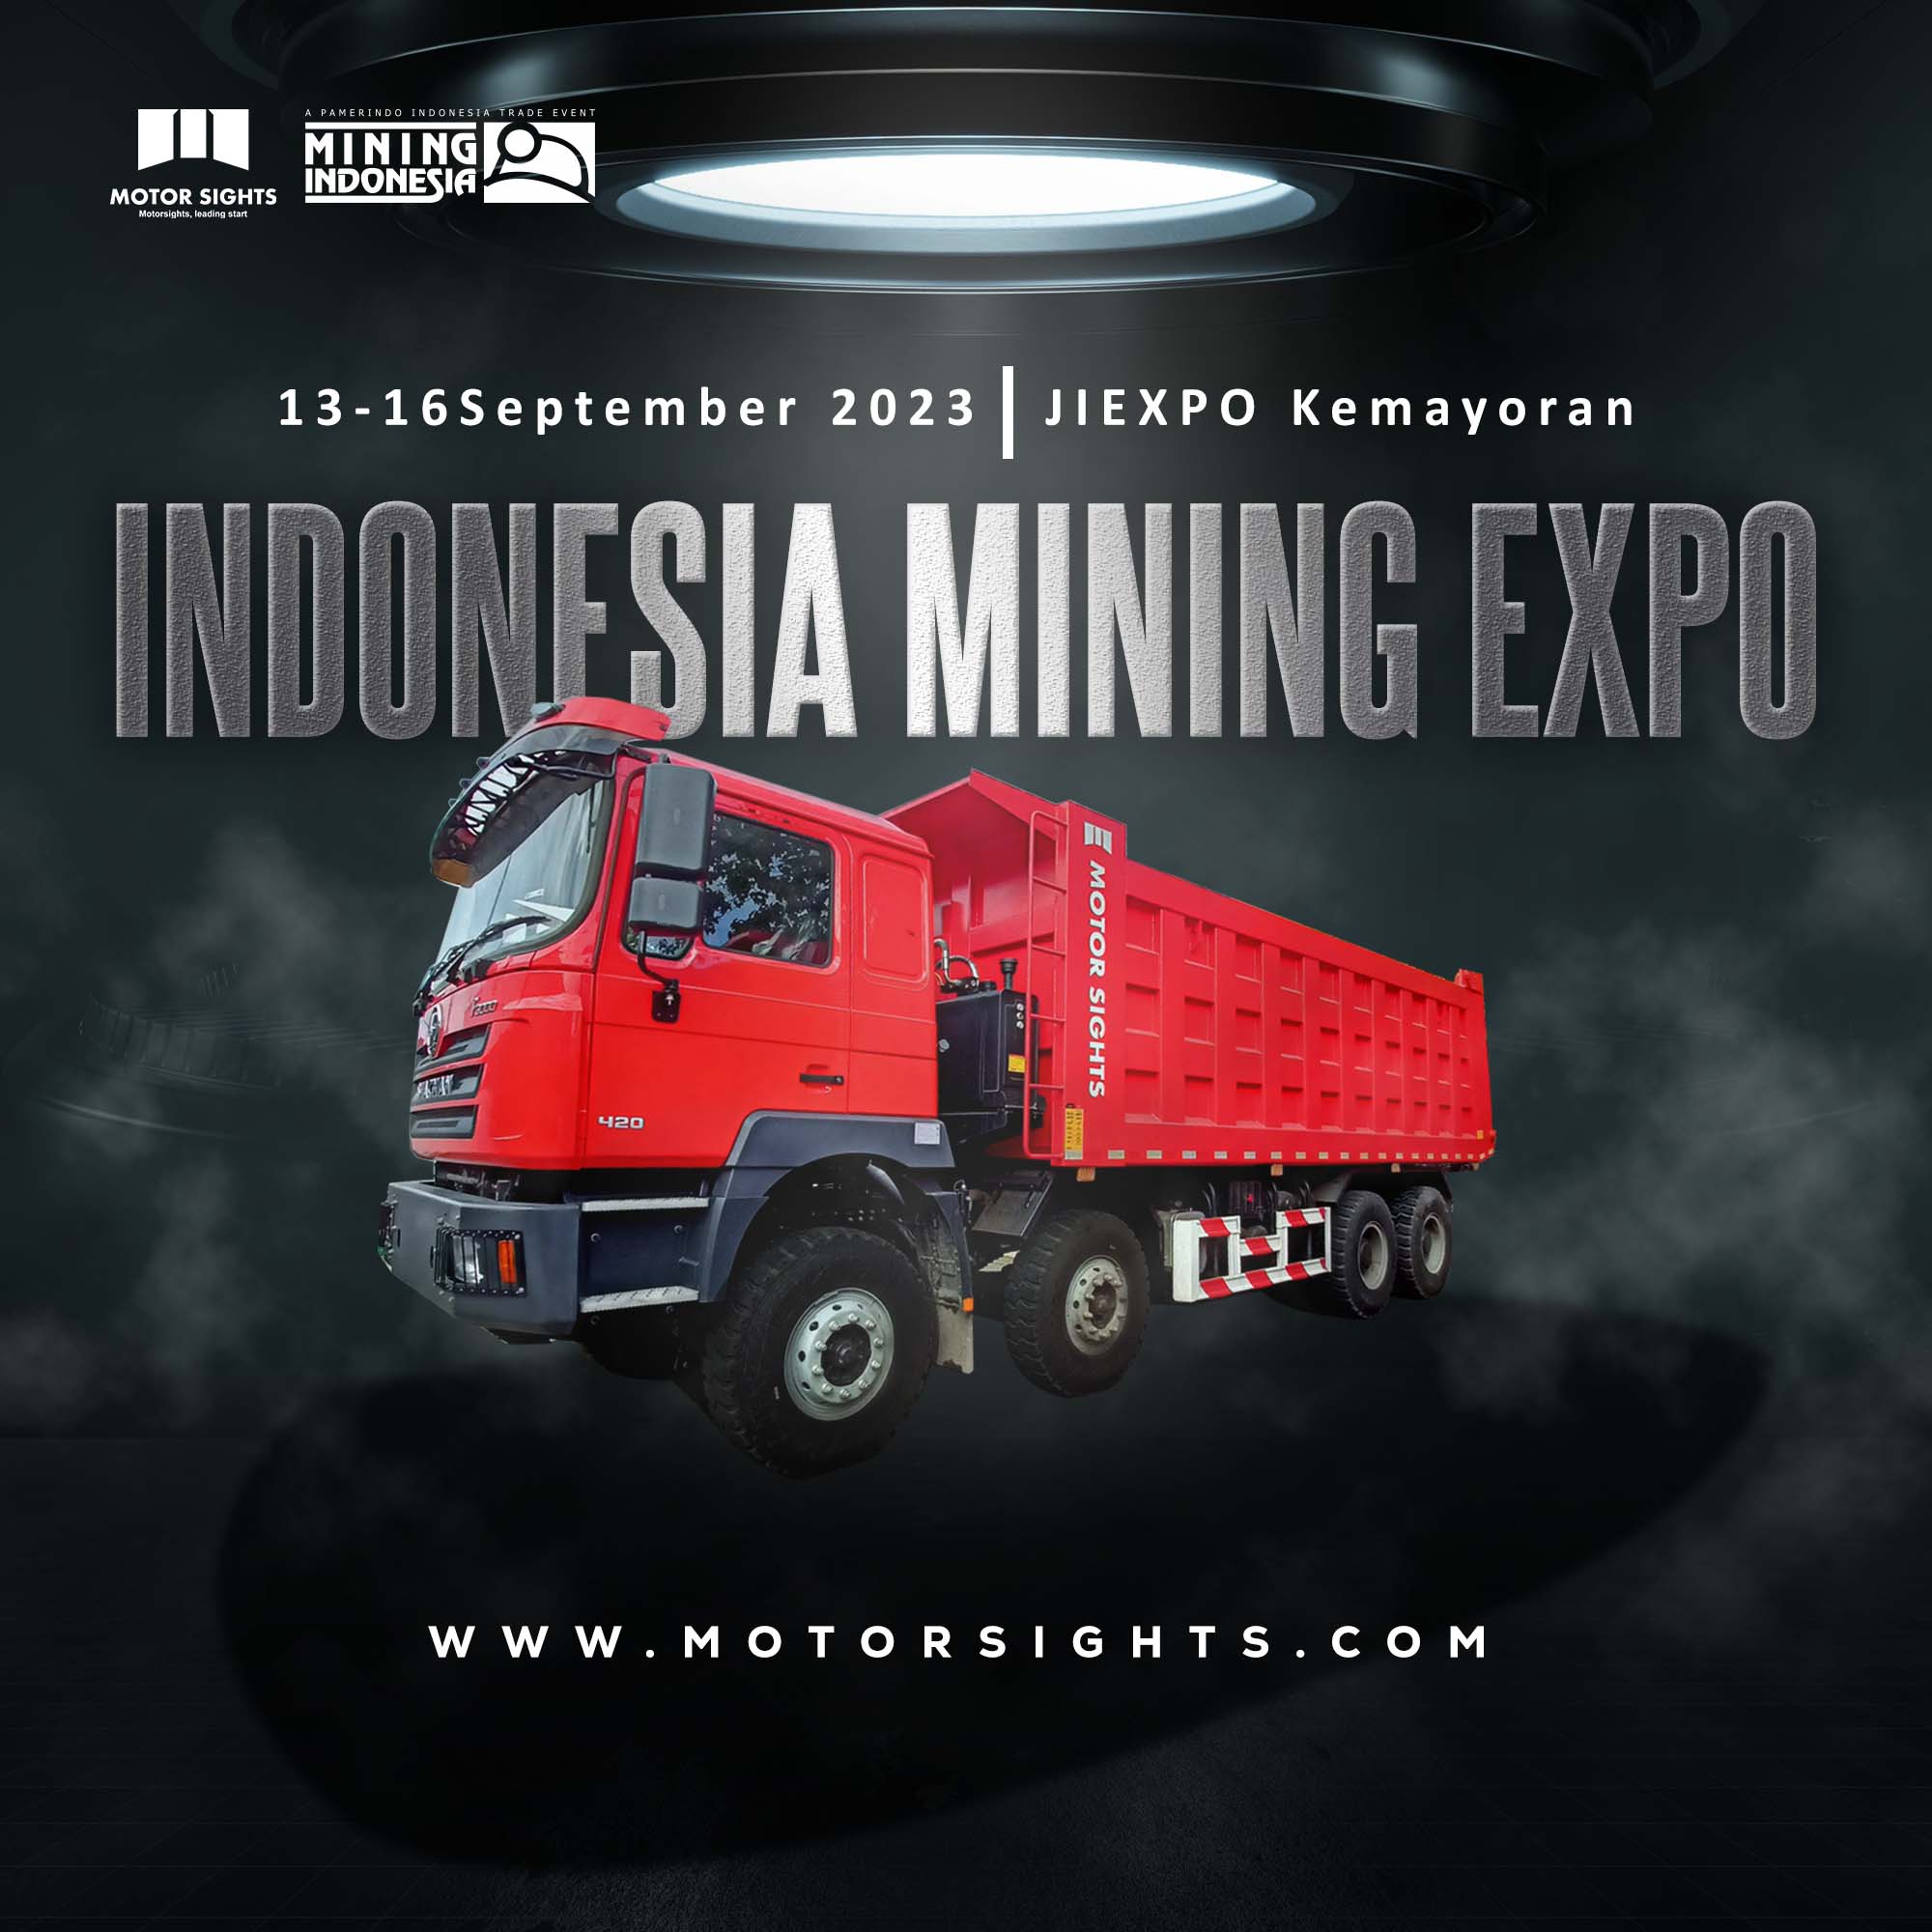 Motor Sights International Makes a Remarkable Debut at Indonesia Mining Expo 2023